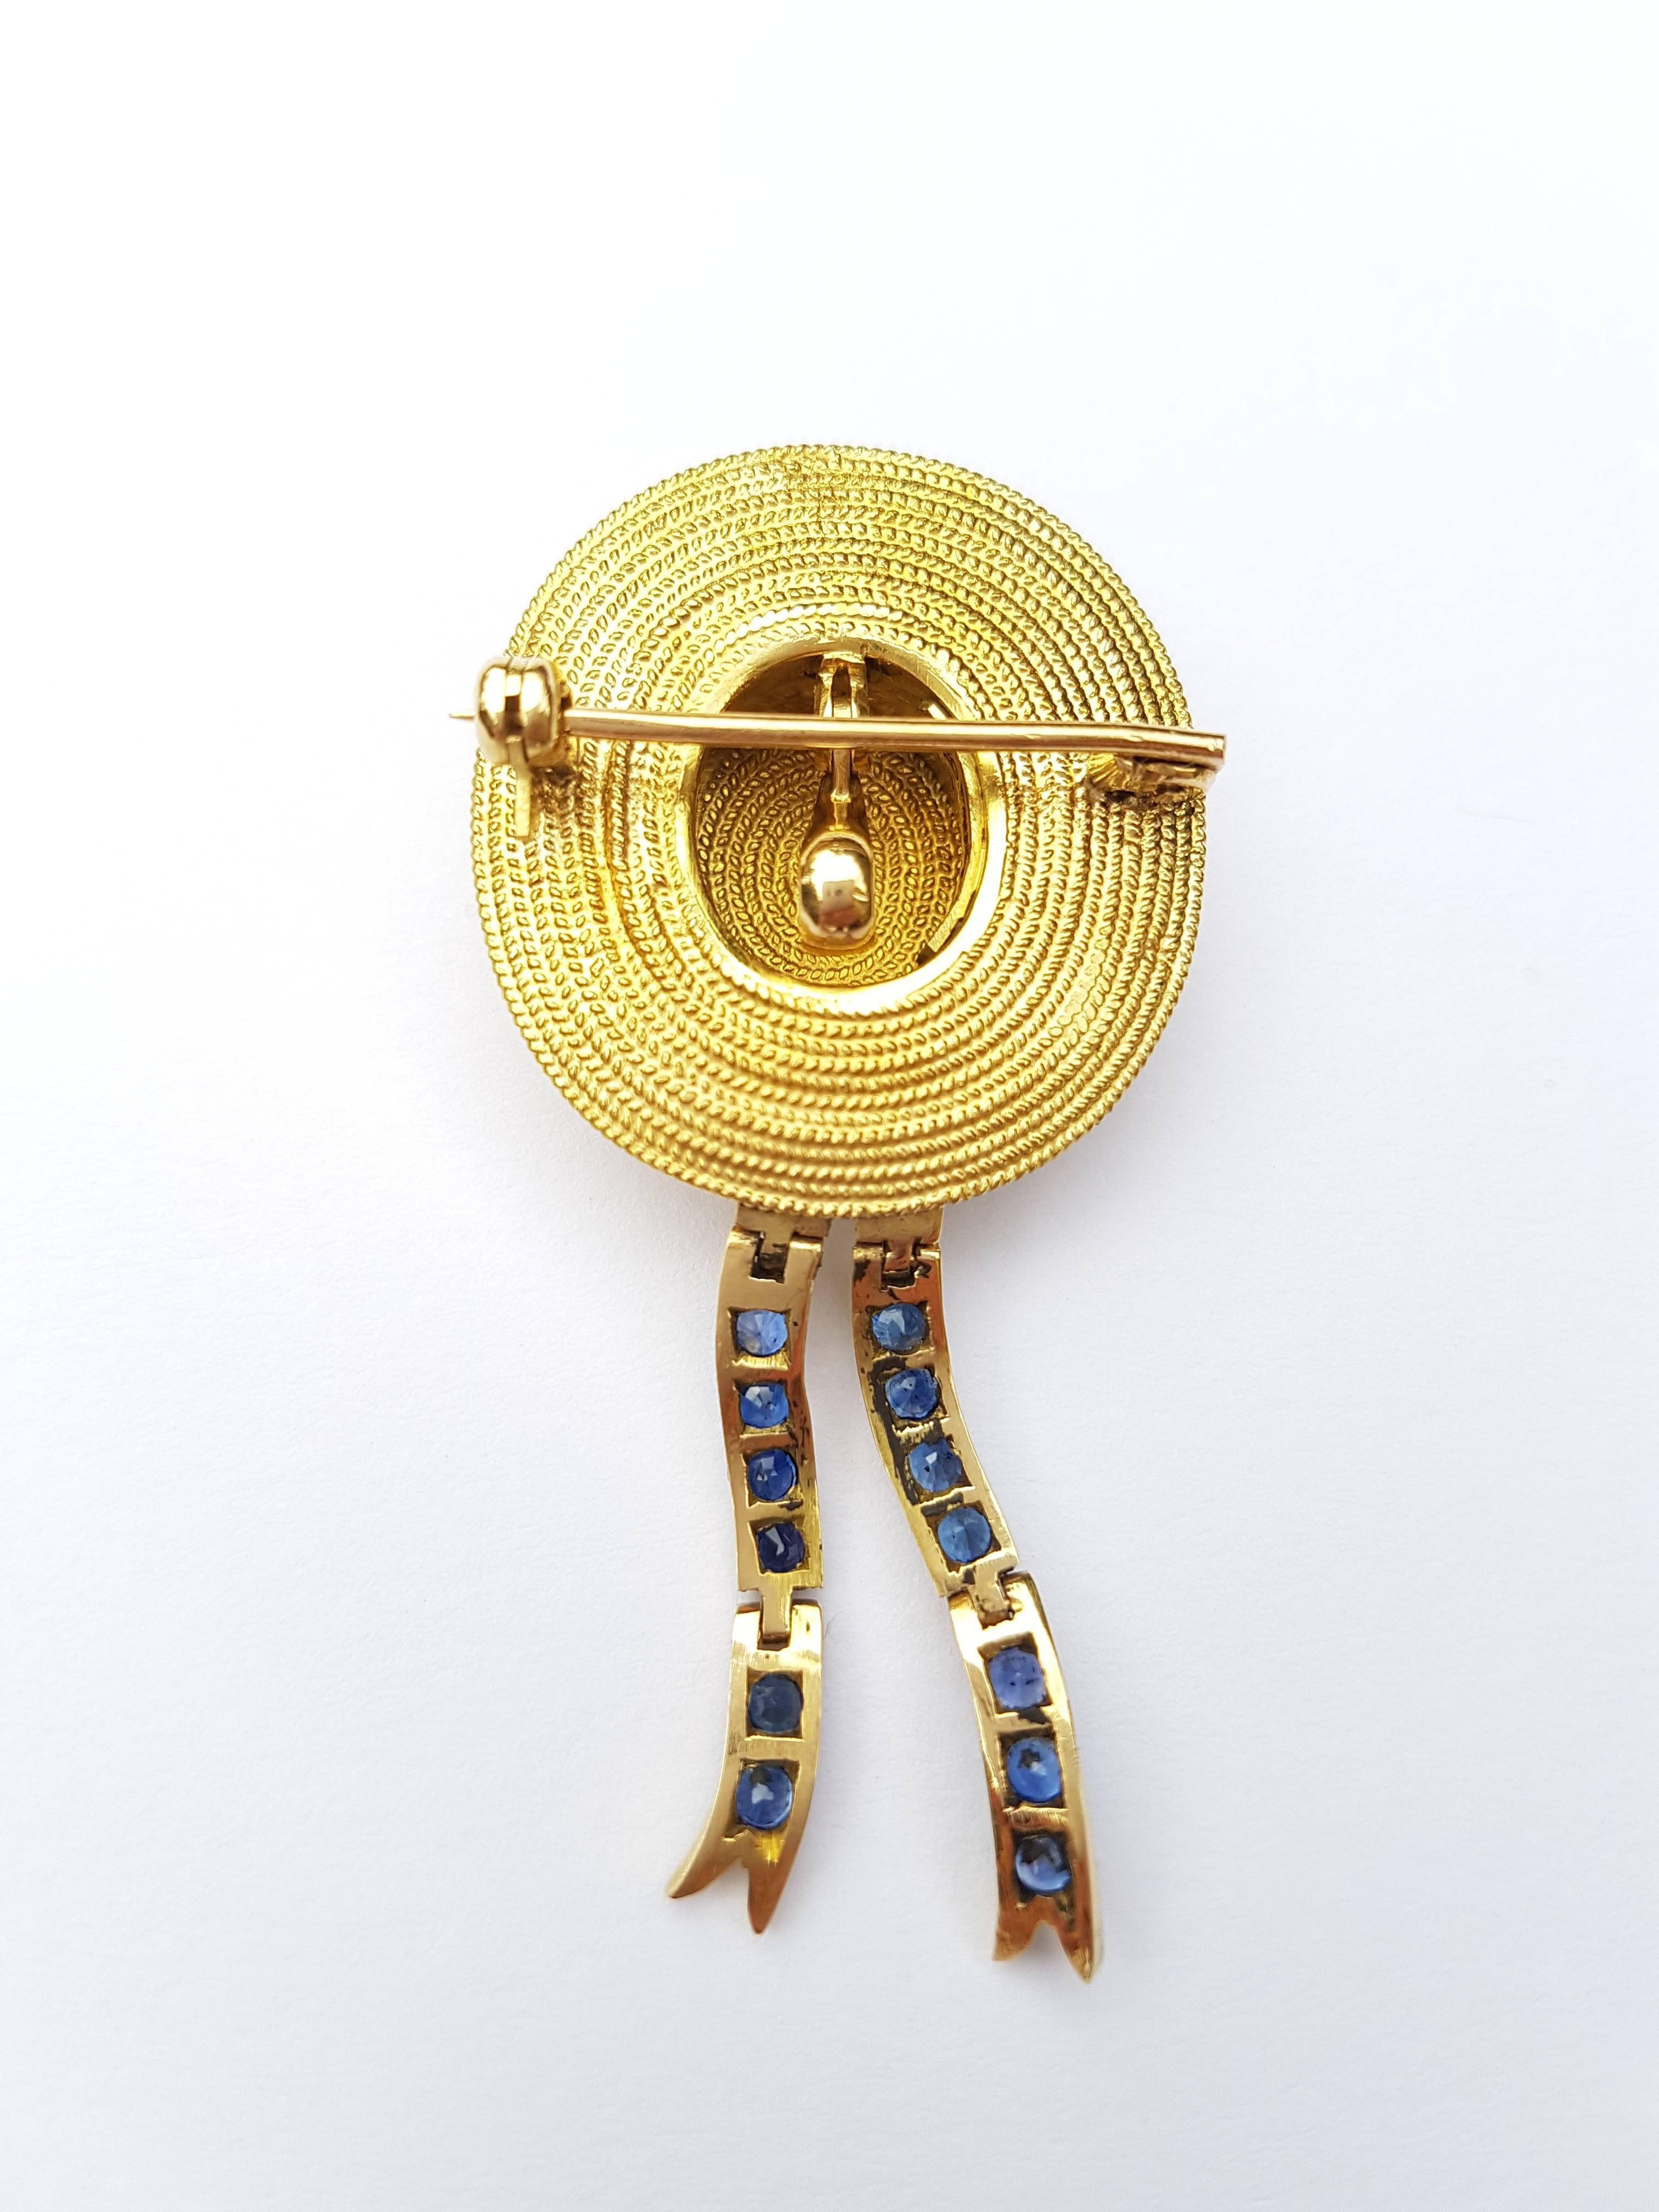 The Original exquisite Missiaglia Gondolier Hat Brooch completely handmade by Venetian Golsmiths in 18k yellow gold with 2.91 carats of Sapphires.